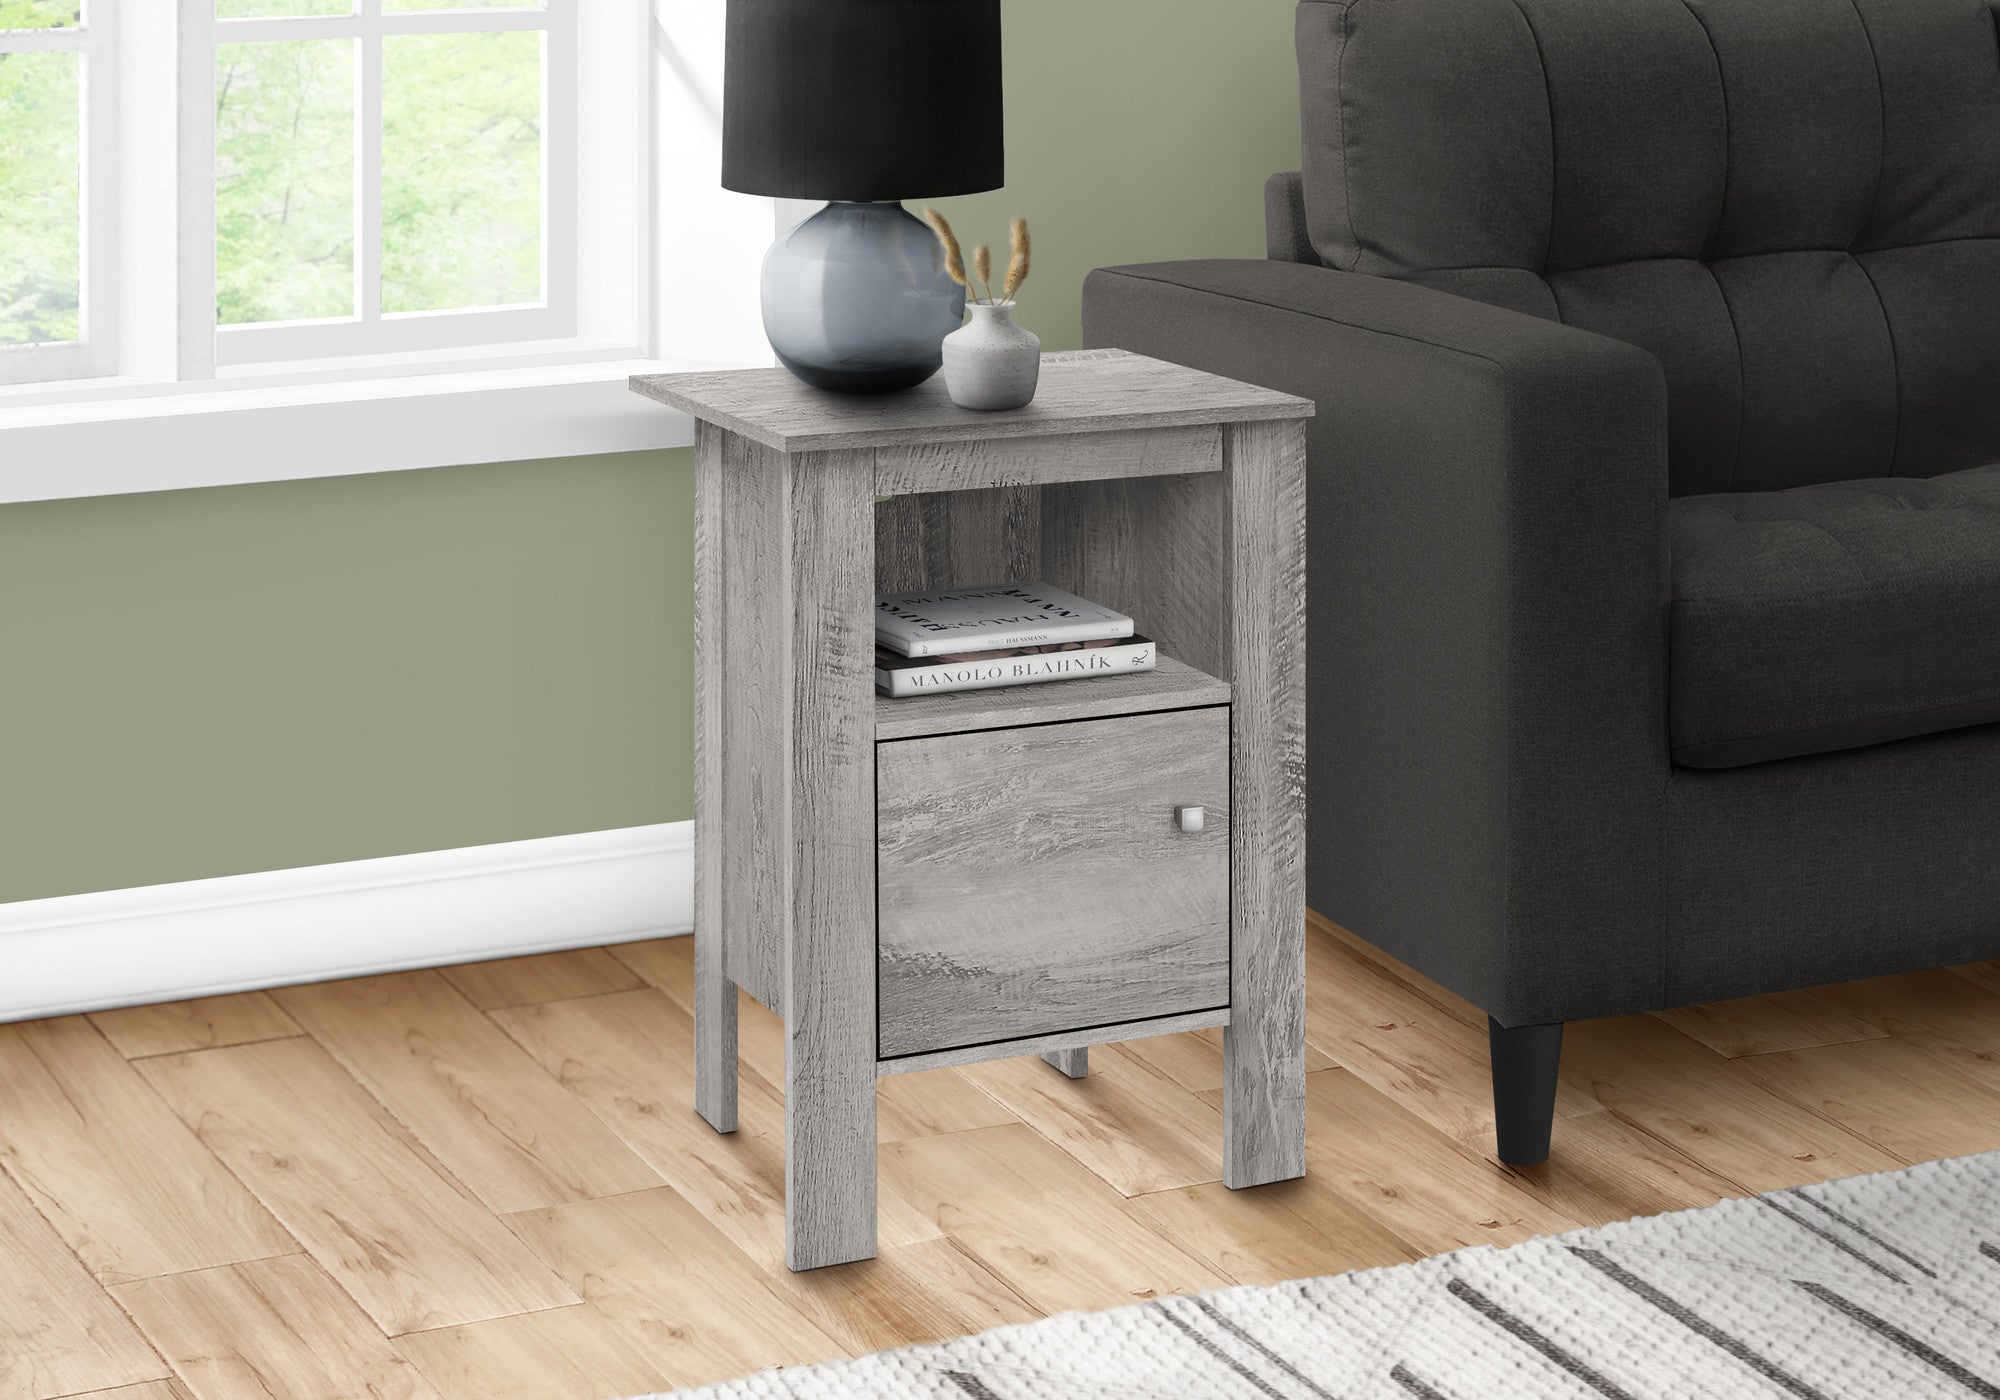 24" Gray Faux Wood Nightstand With Storage